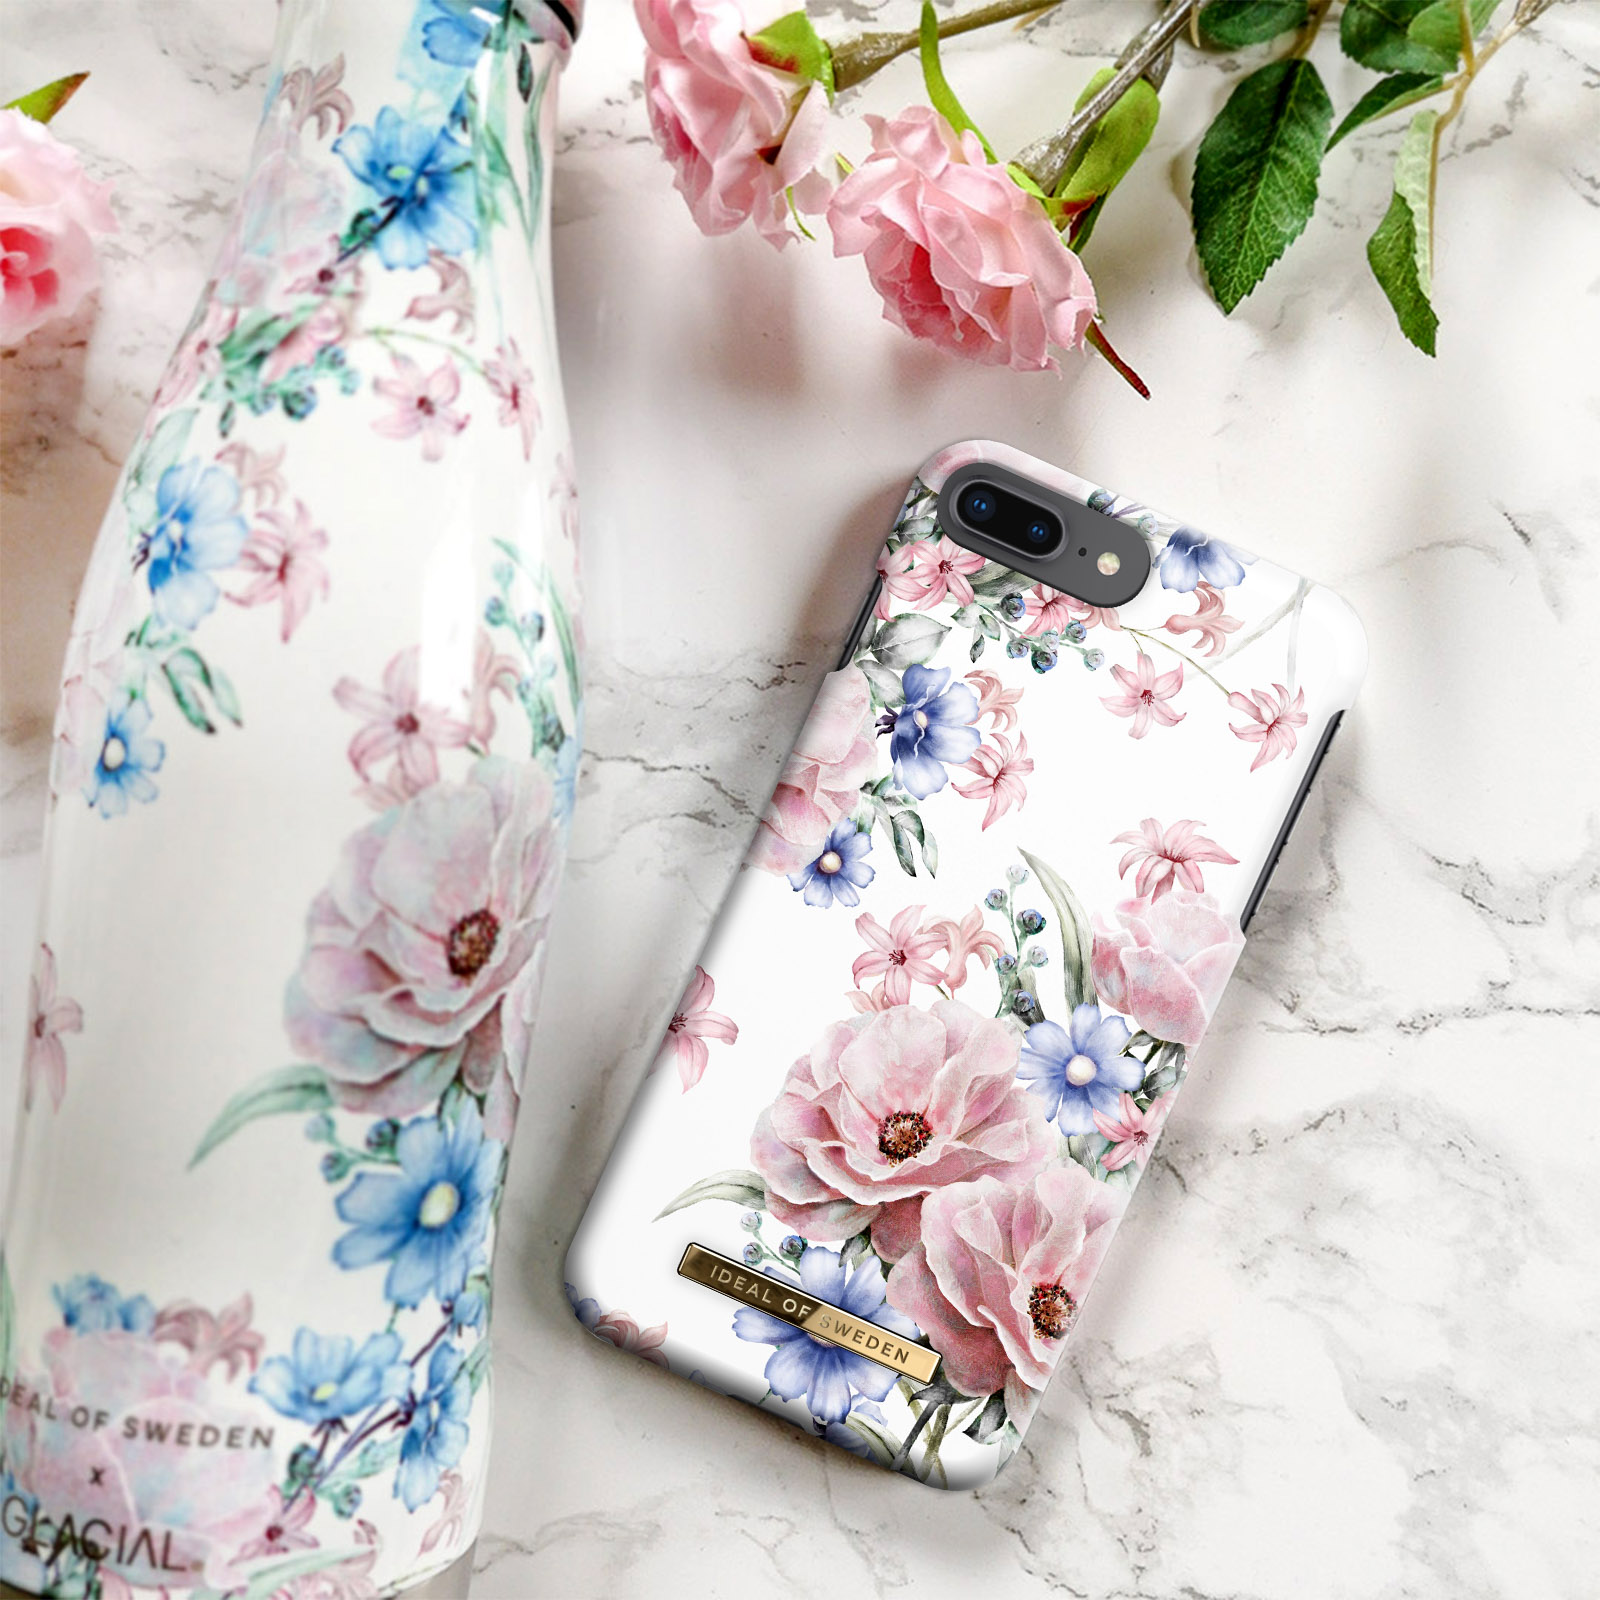 IDEAL OF SWEDEN Floral Apple, 8 iPhone Series, Plus, Rosa Backcover, Romance